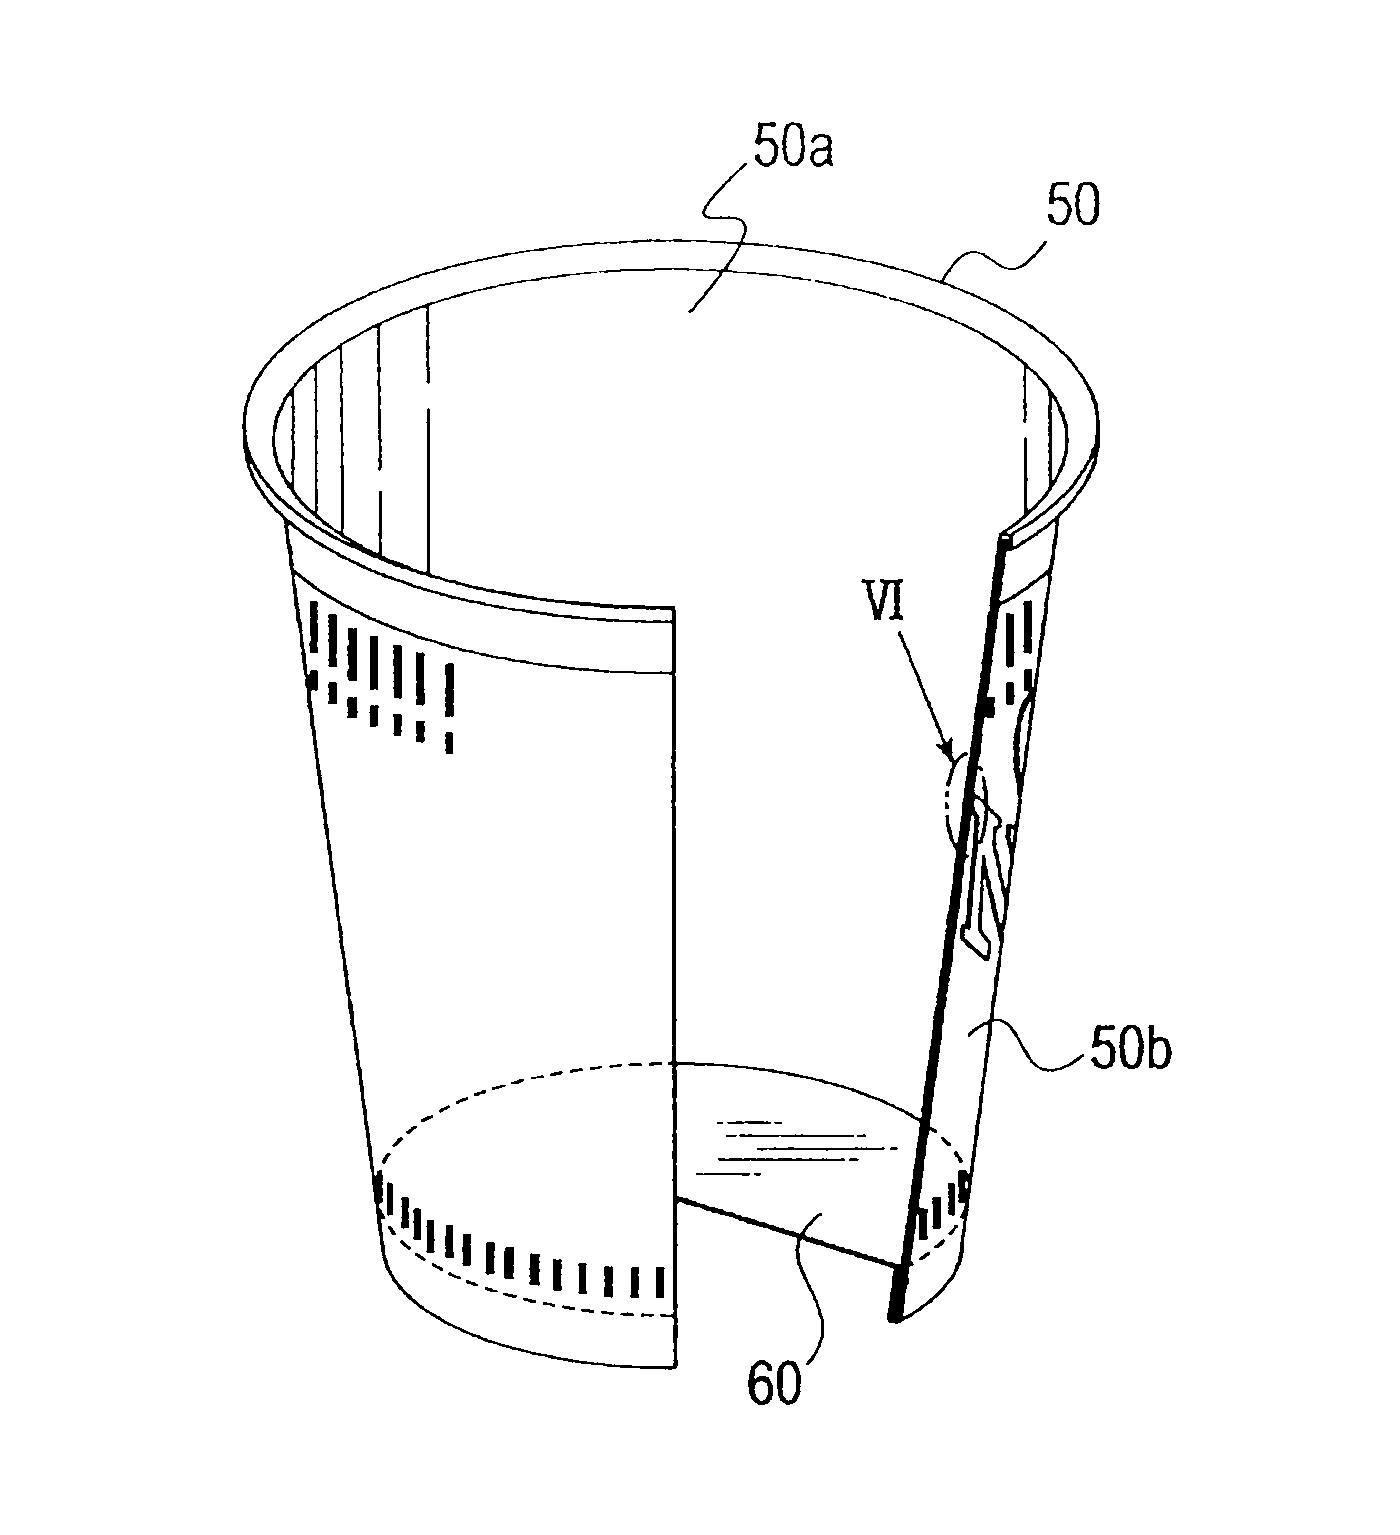 Brightening ink composition for printing, paper container material using the brightening ink composition, and heat insulating foamed paper container